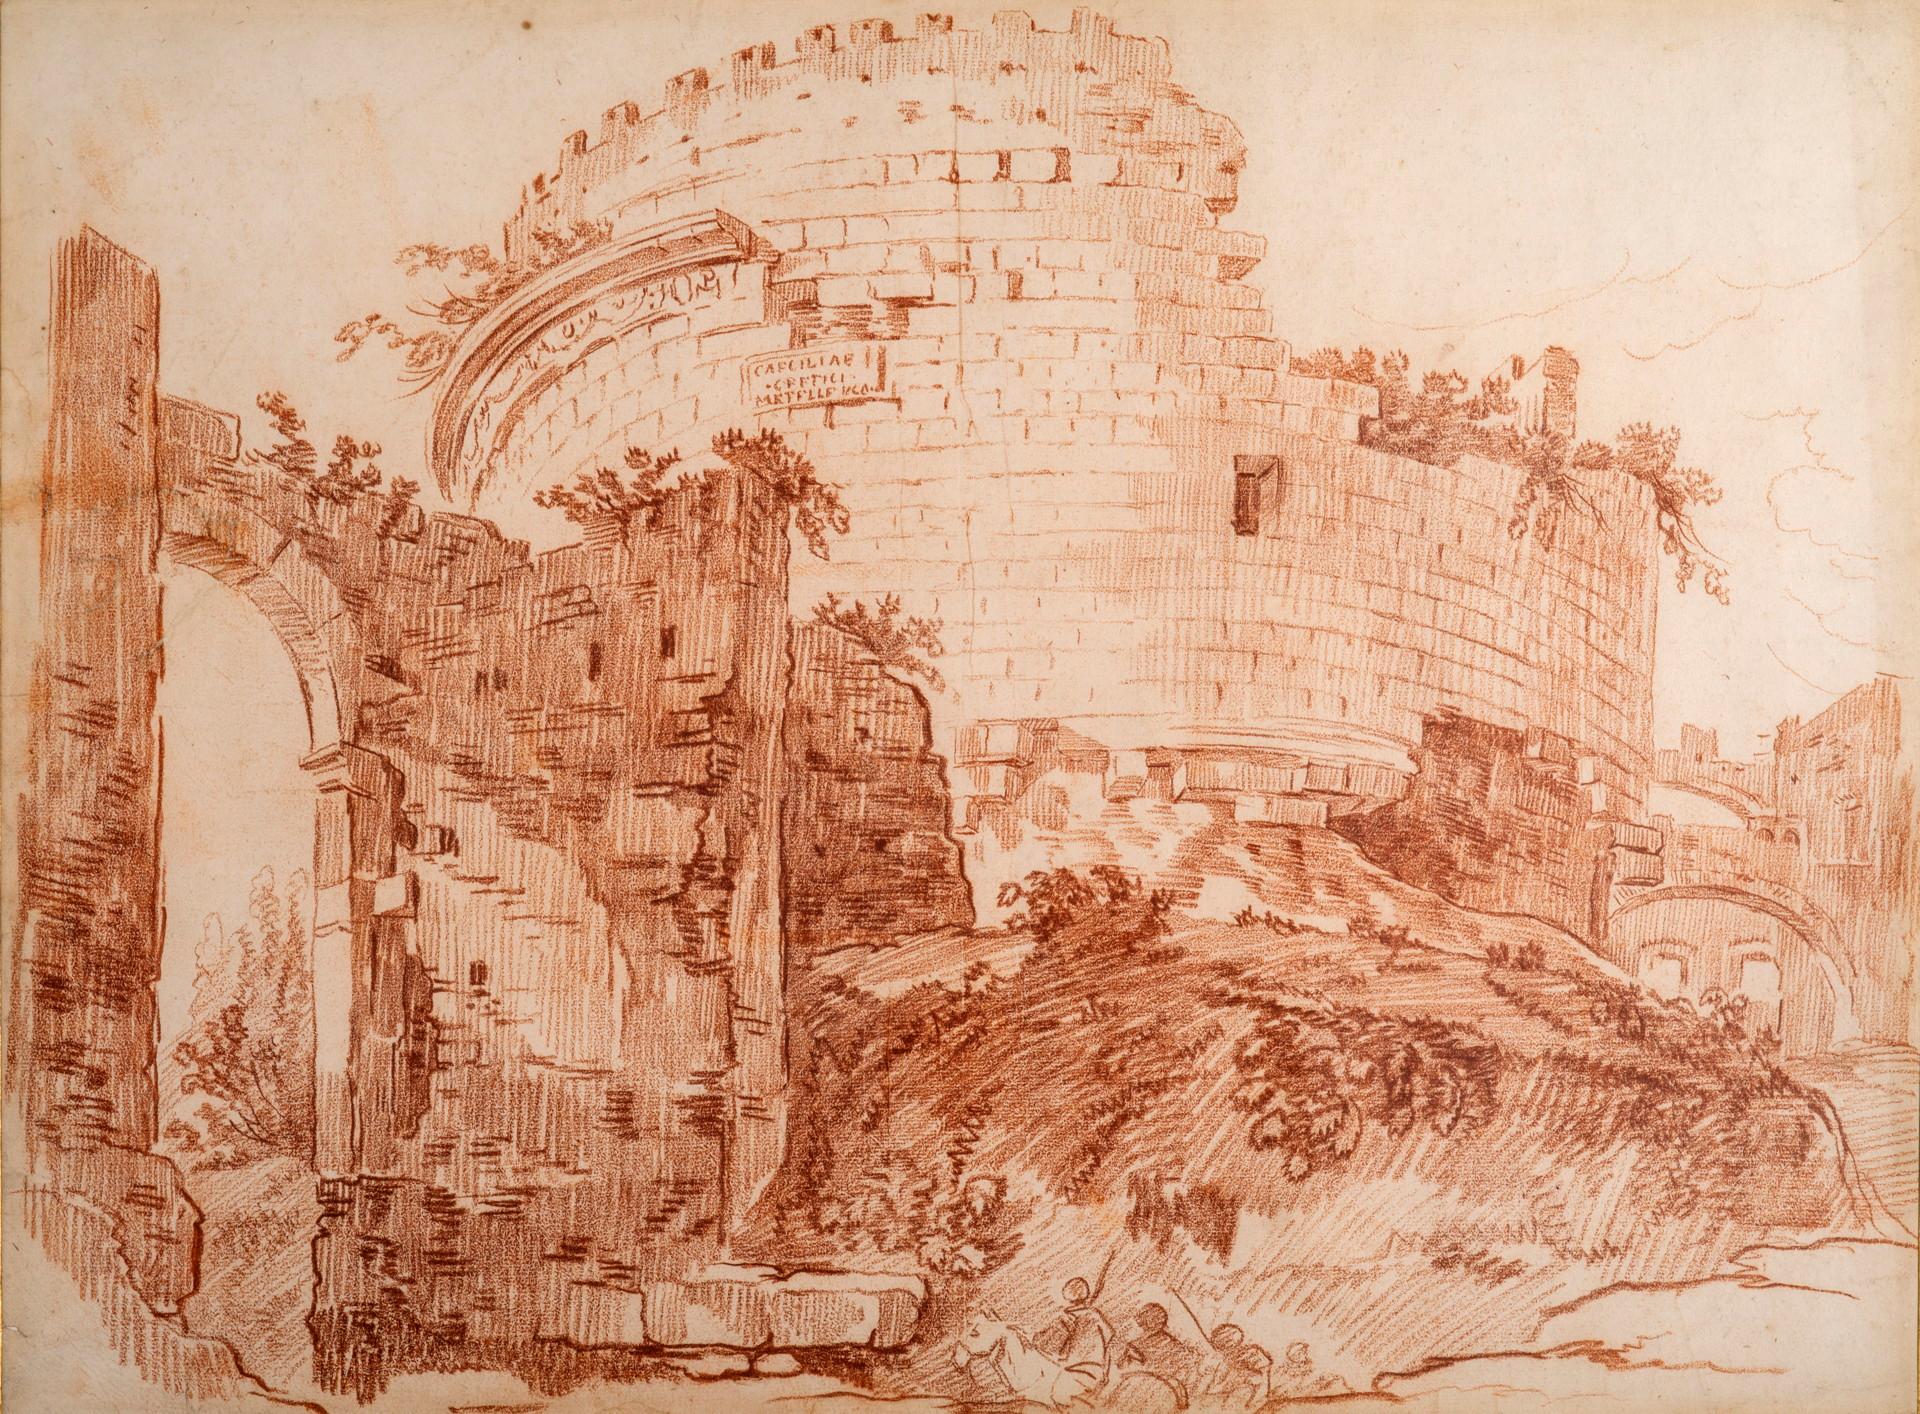 The Tomb of Caecilia Metella, Rome.
Red chalk on paper.
Provenance: H. Shickman Gallery, New York (D1311). Label verso where given to Hubert Robert.

This sumptuous drawing is a contemporary and direct copy of a drawing now in the Musee des